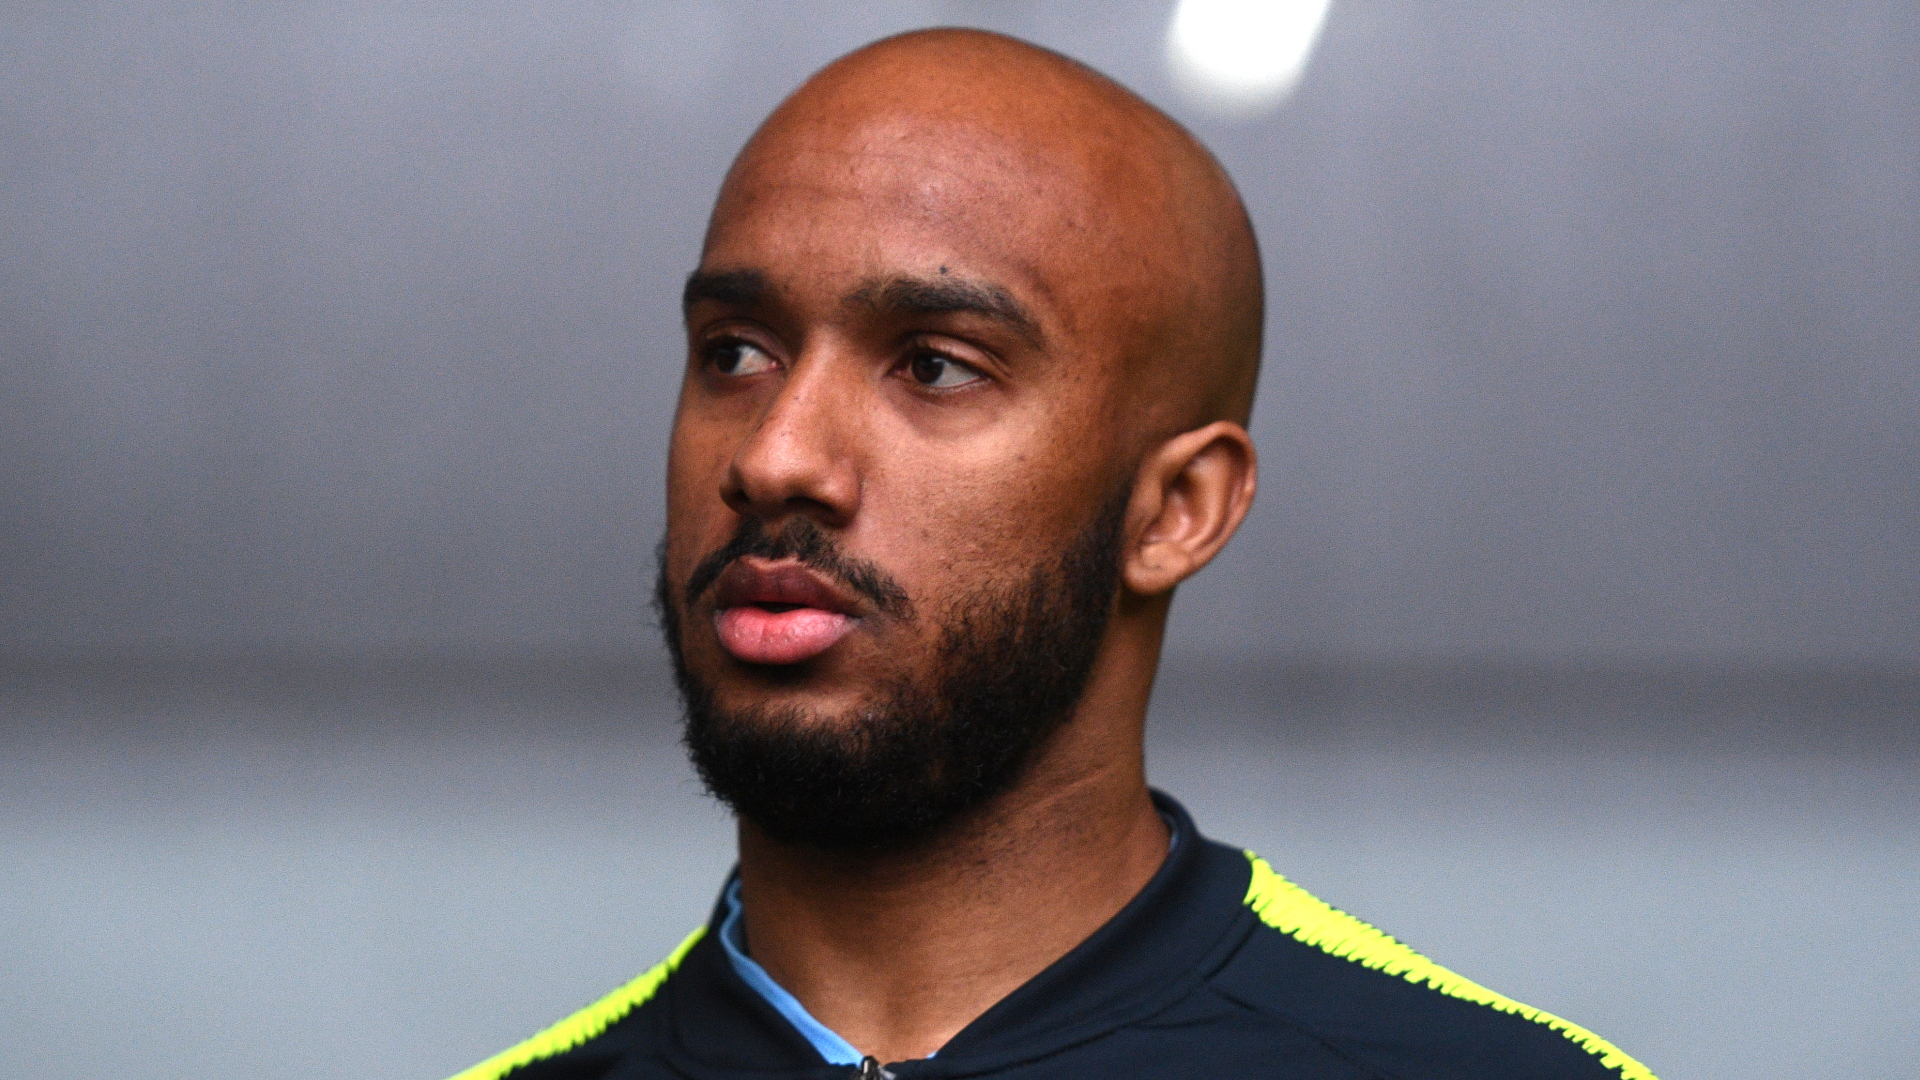 Everton announce signing of £10m Delph from Man City